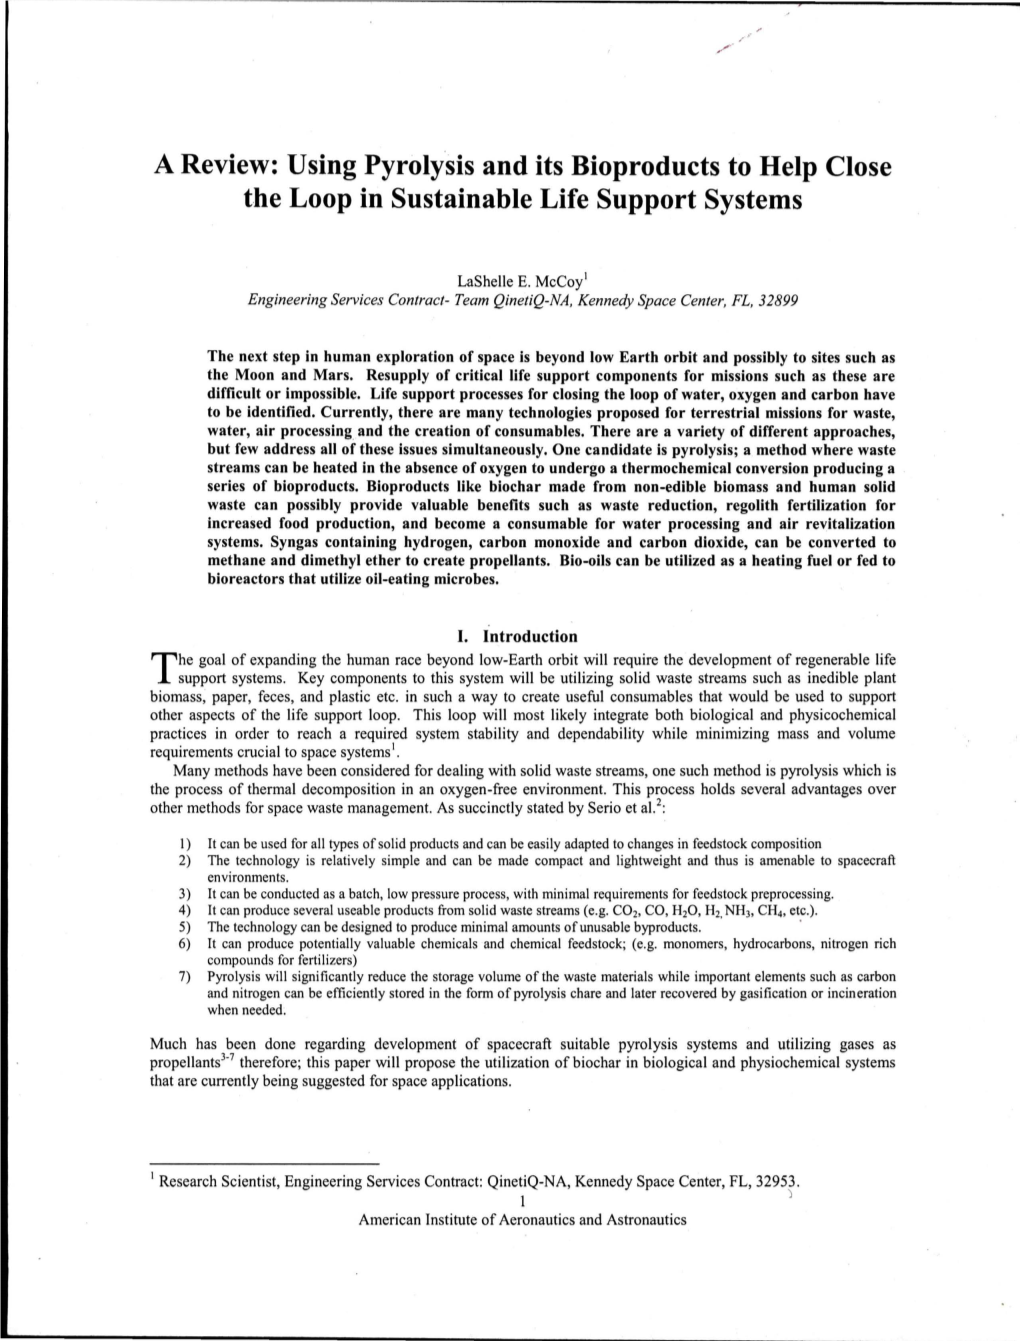 Using Pyrolysis and Its Bioproducts to Help Close the Loop in Sustainable Life Support Systems